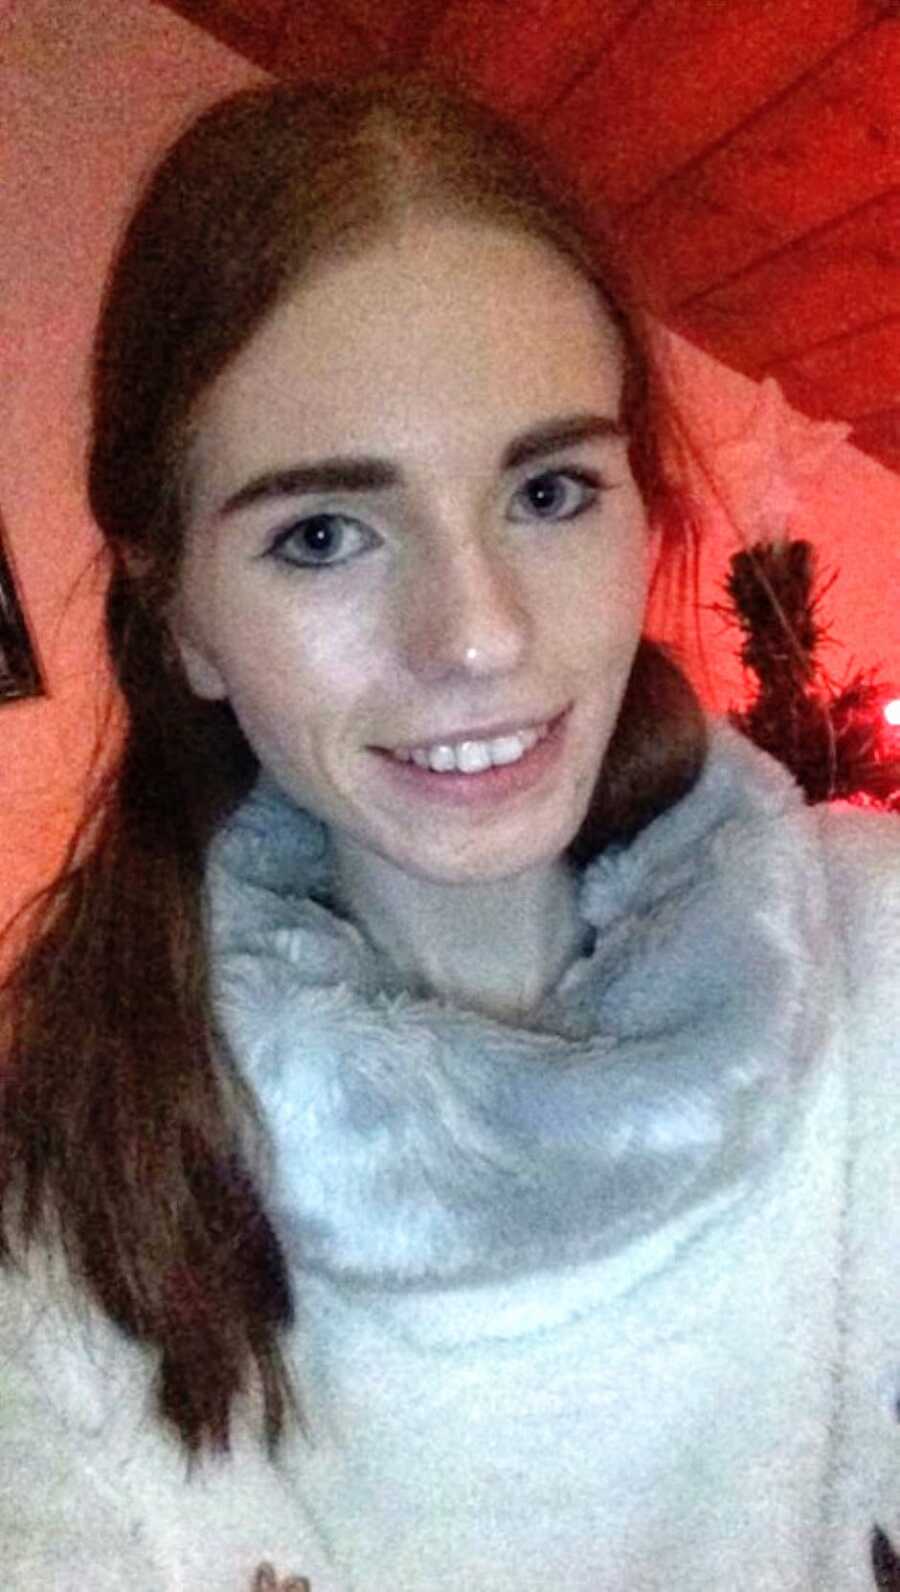 Woman battling anxiety and an eating disorder takes a selfie while wearing a turtleneck to stay warm